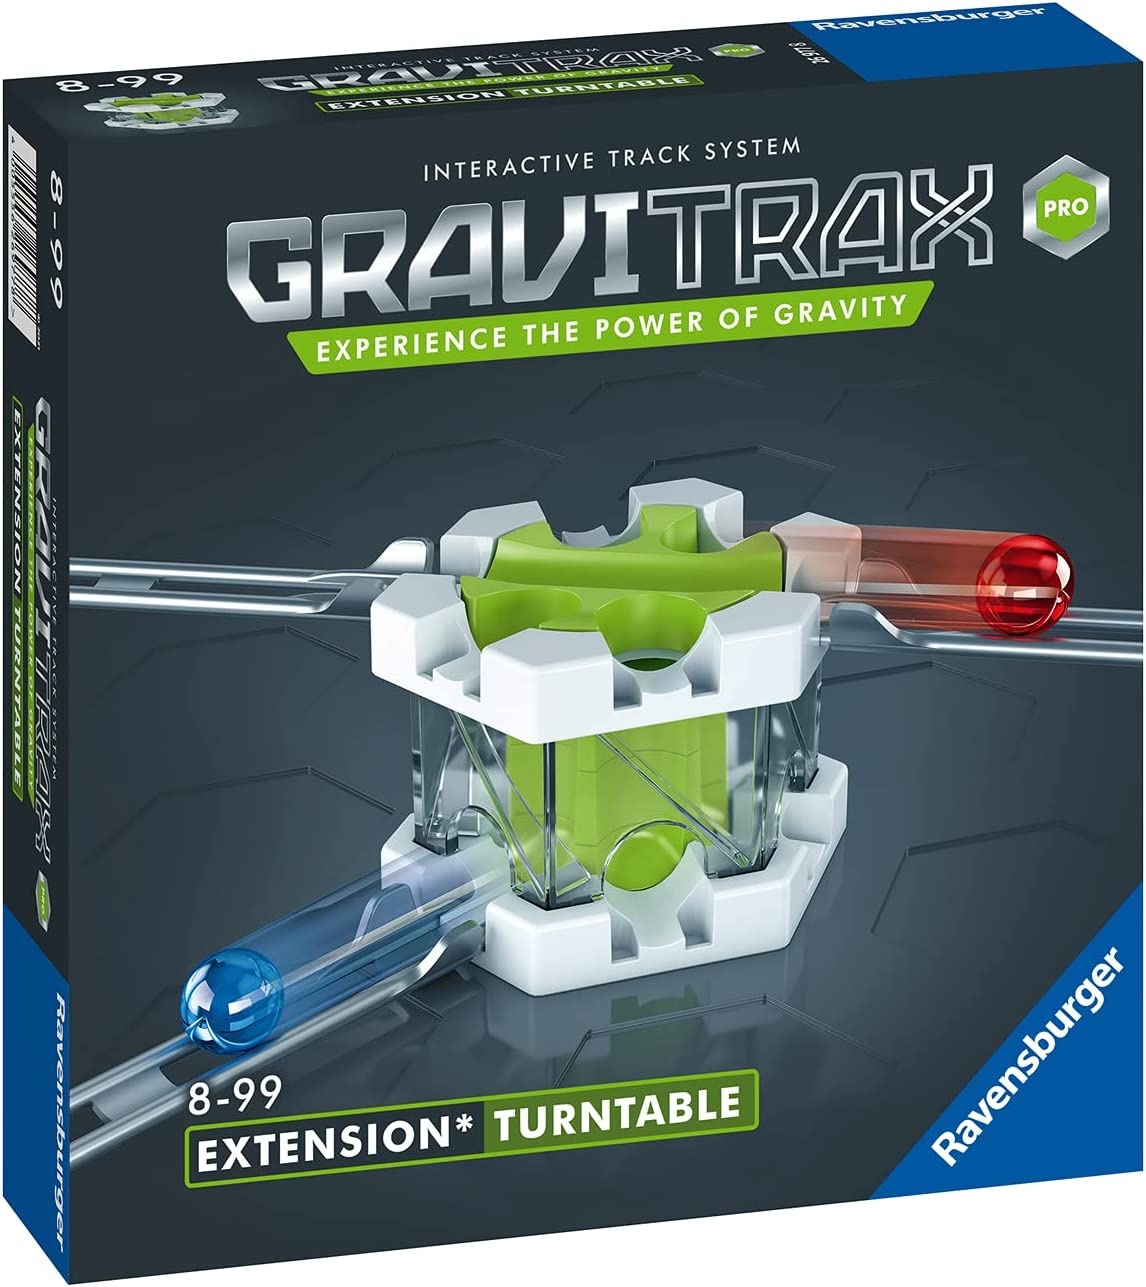 GRAVITRAX PRO TURNTABLE - THE TOY STORE